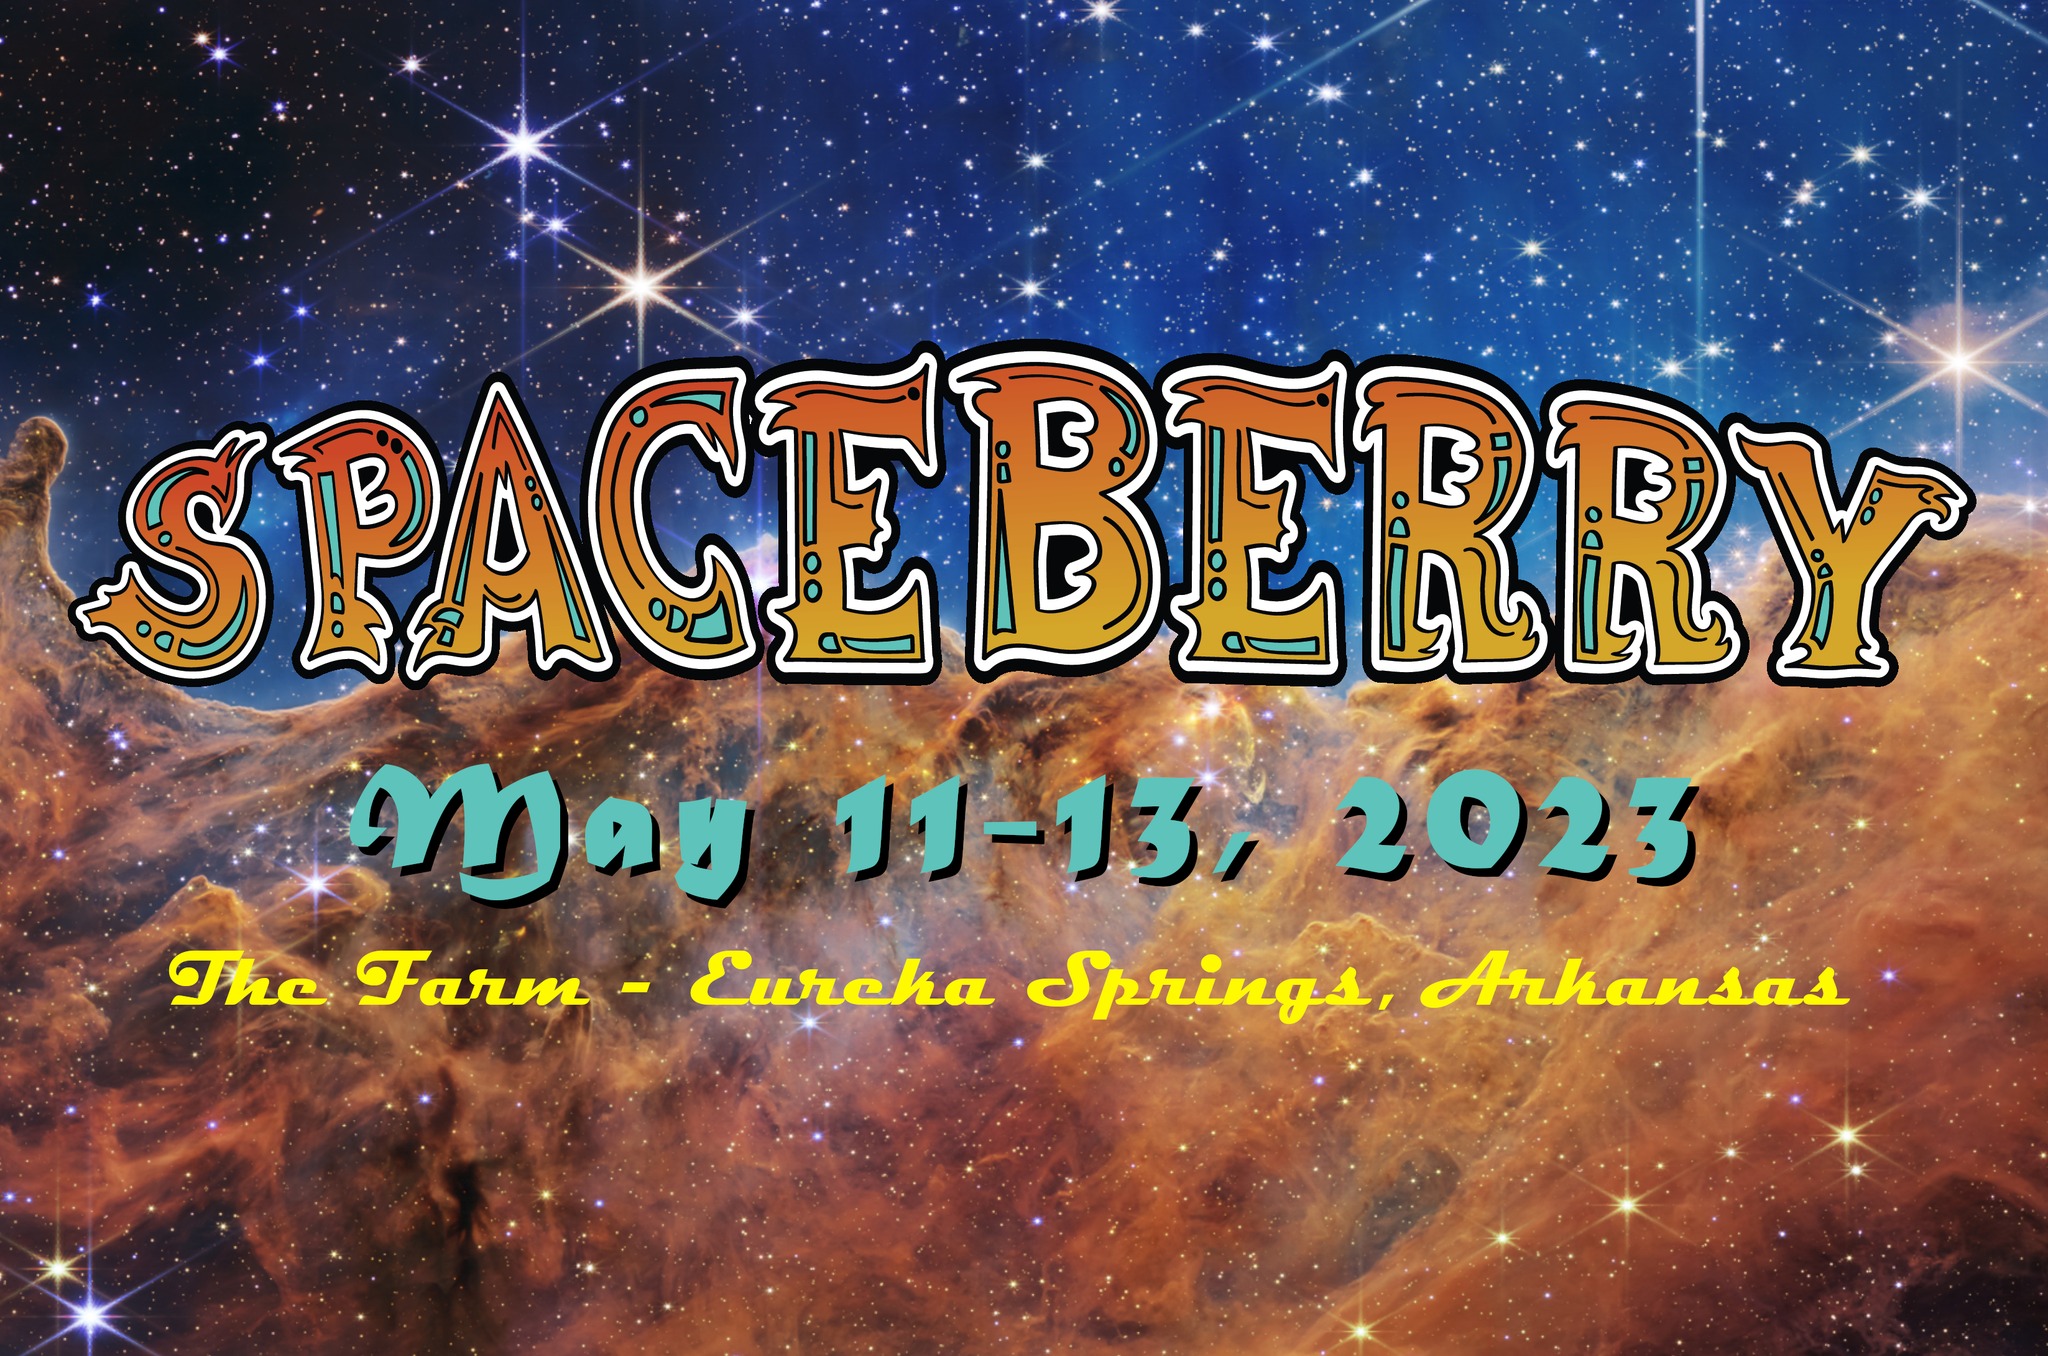 Featured image for “Spaceberry Festival”